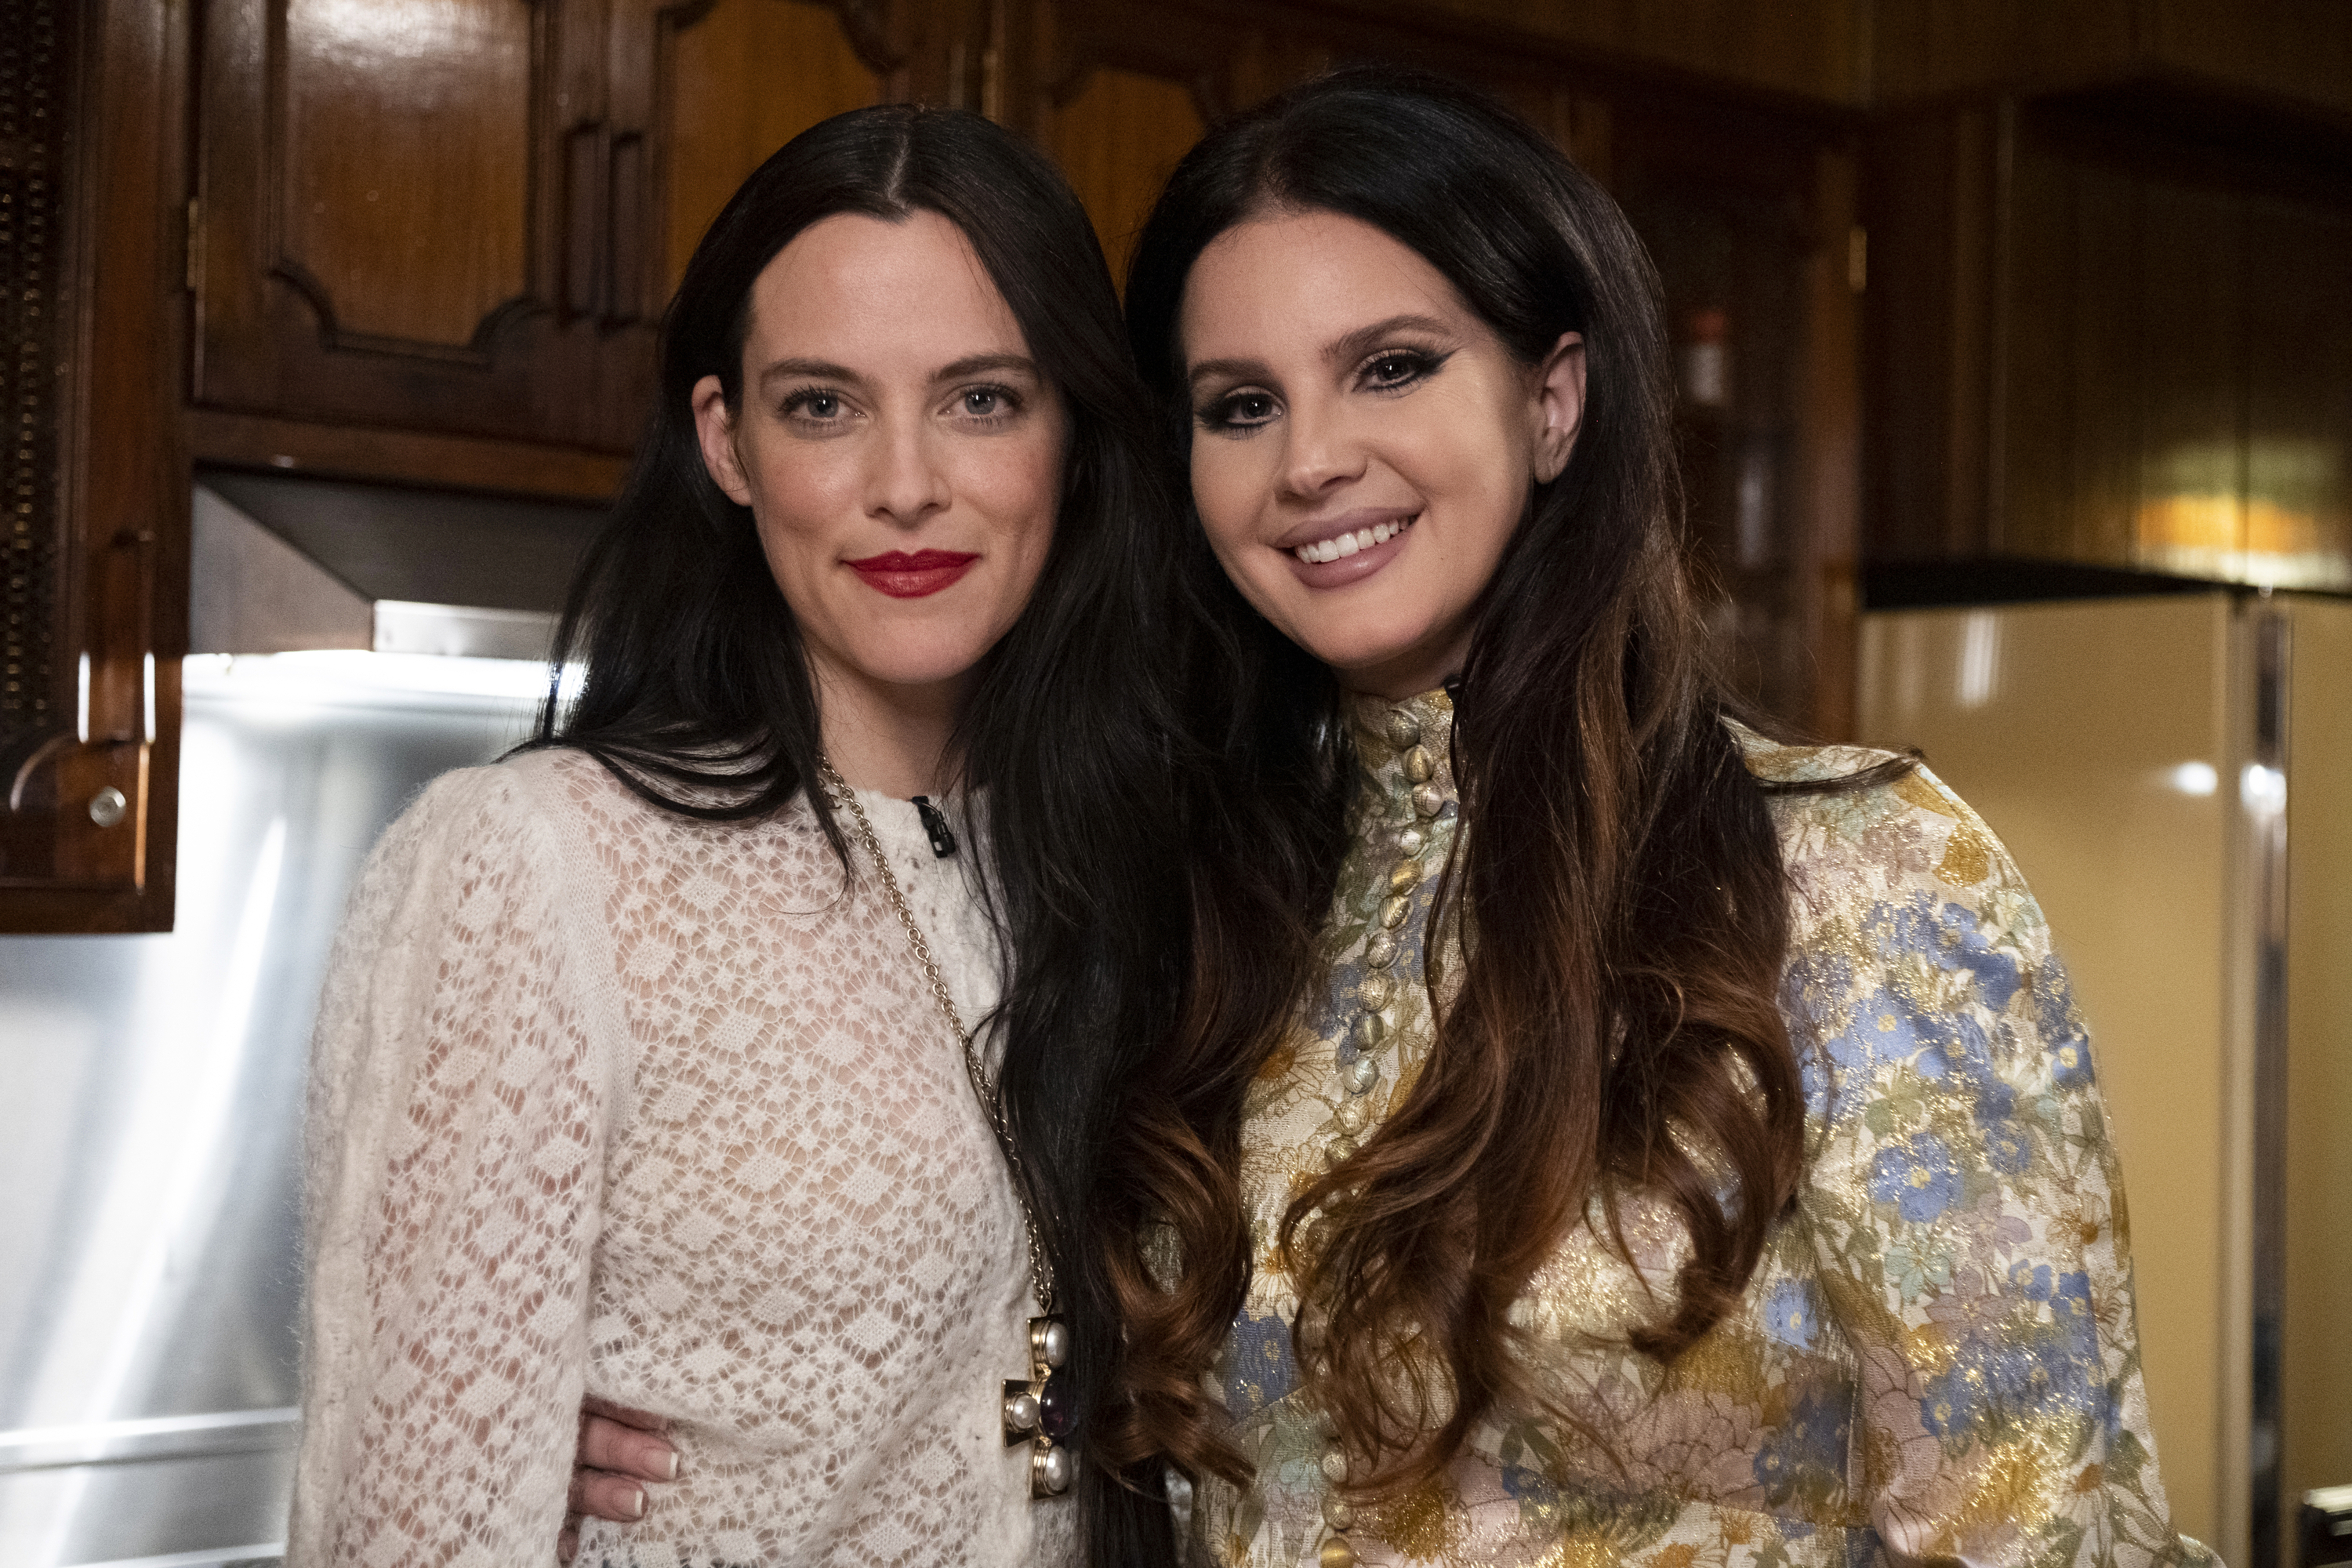 Riley Keough and Lana Del Rey photographed at Graceland during Christmas at Graceland - Season 1 | Source: Getty Images